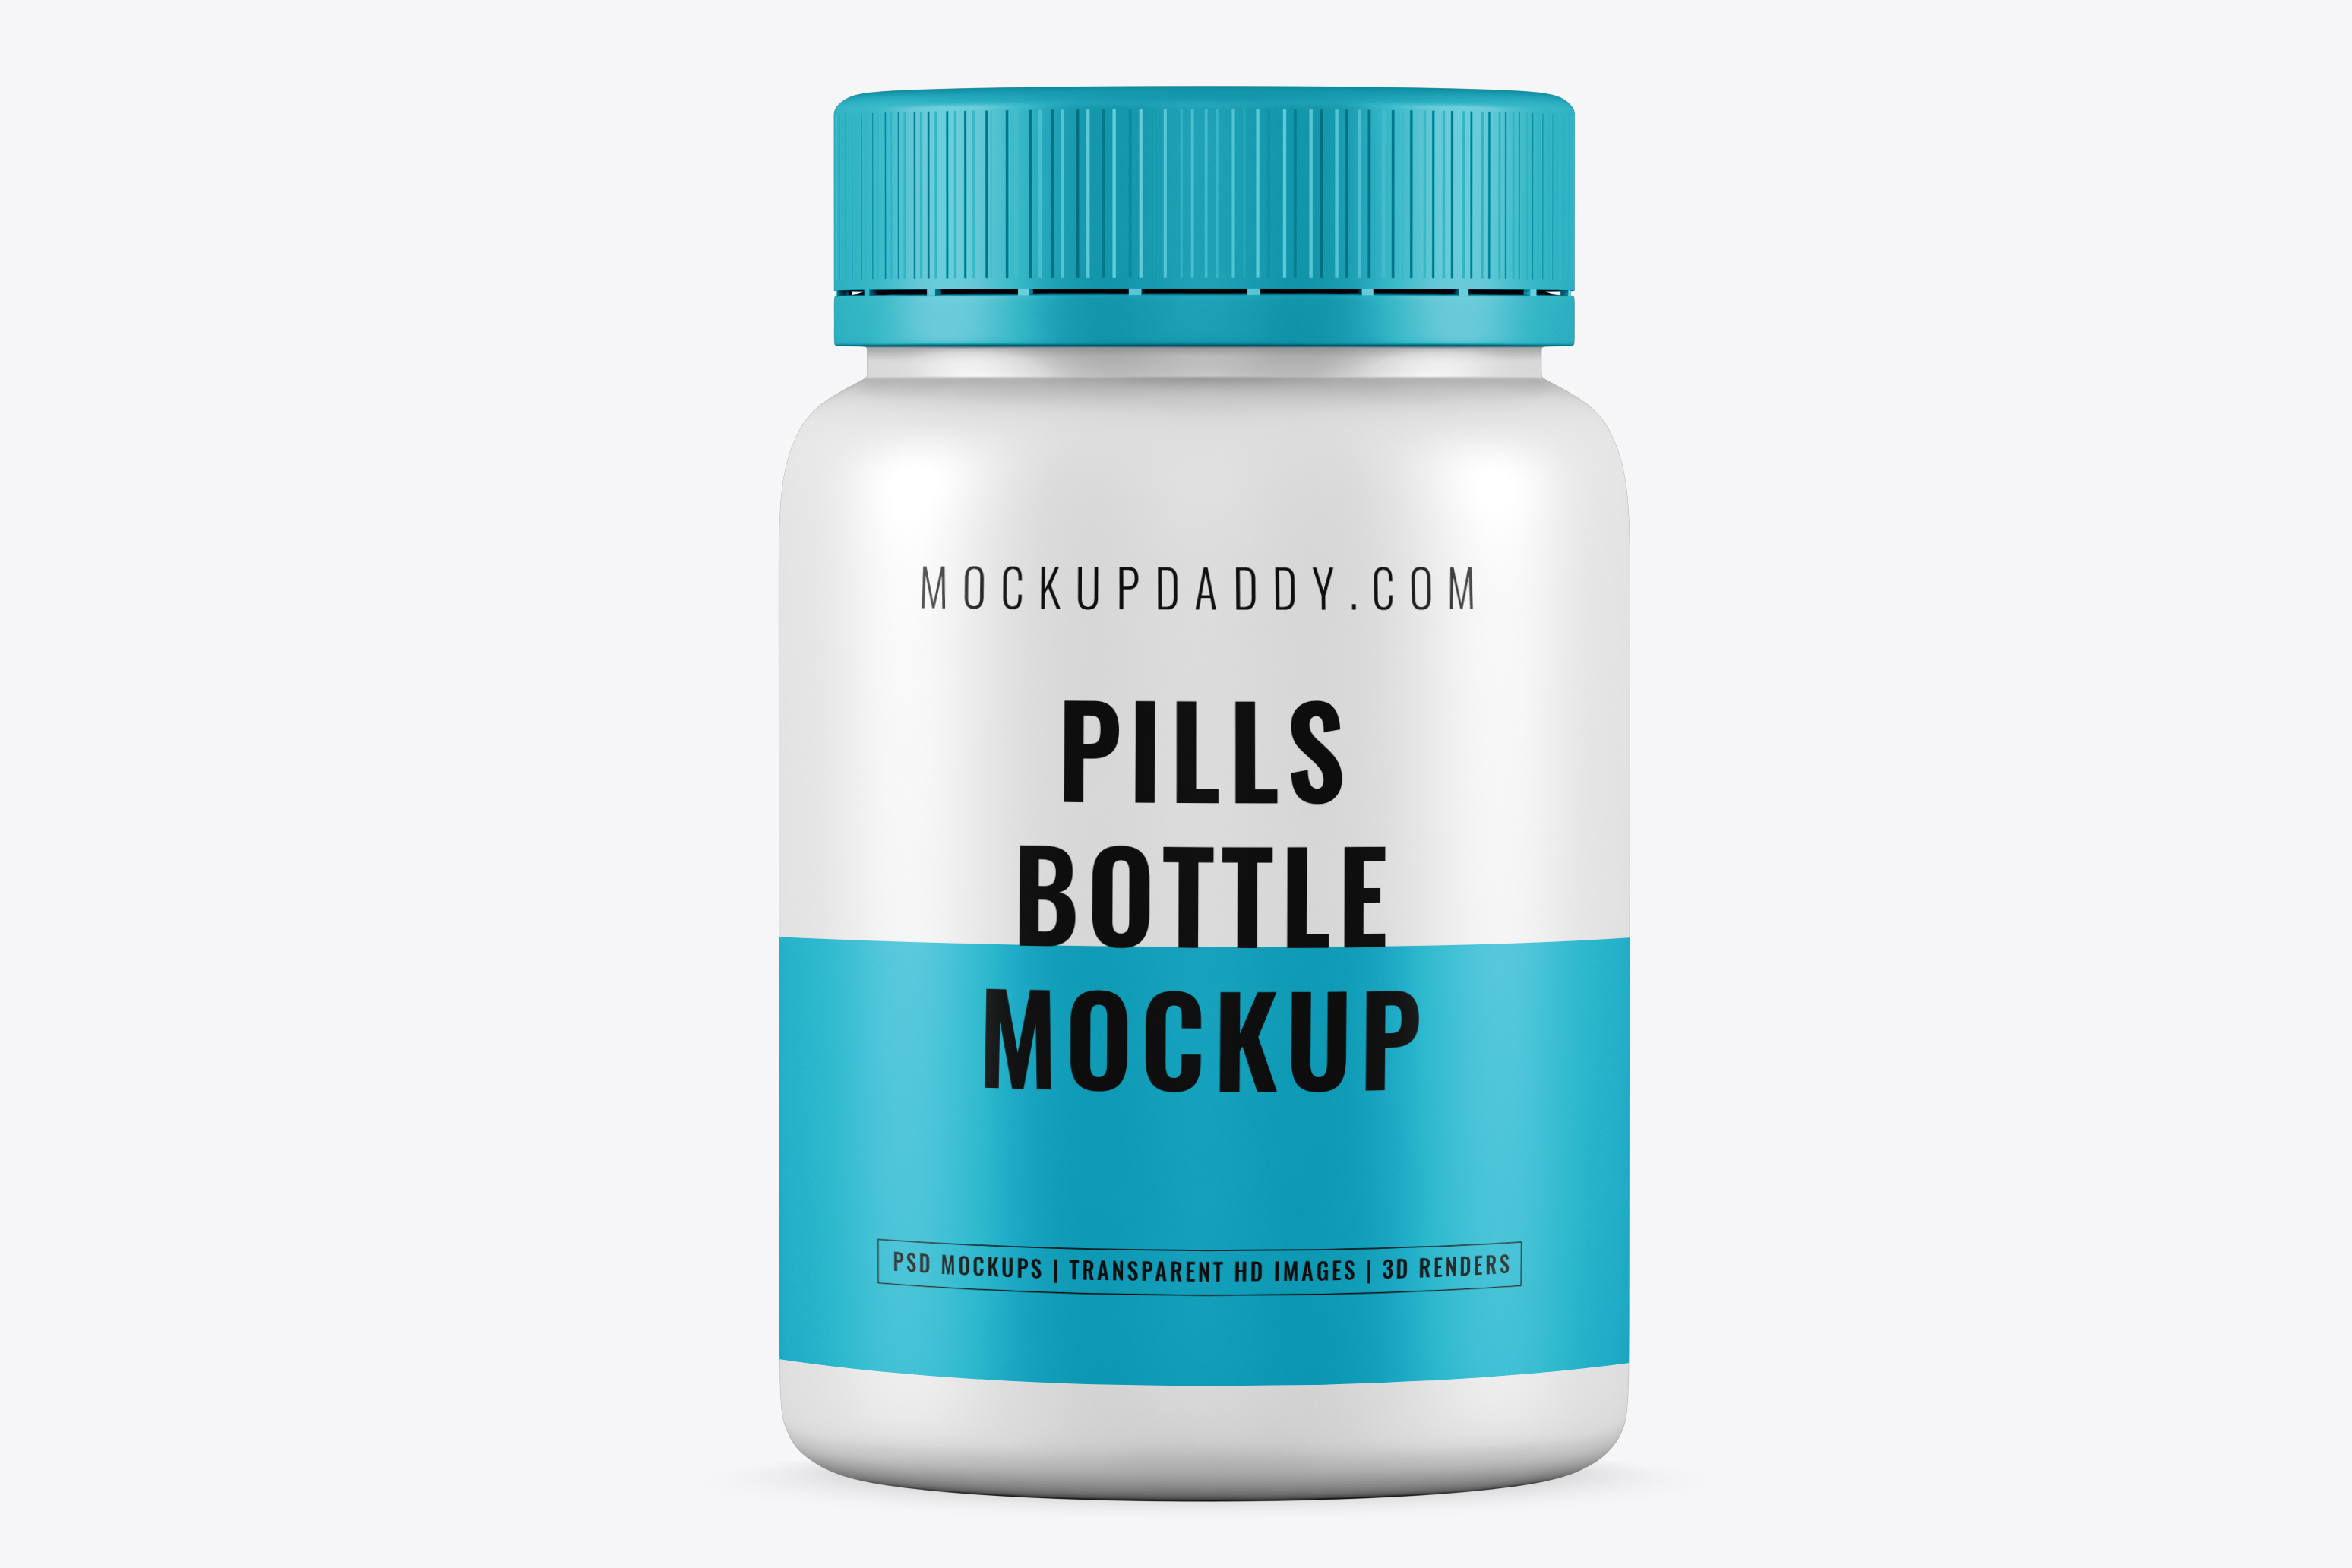 Small Pills Bottle Psd Mockup Free Download - Mockup Daddy